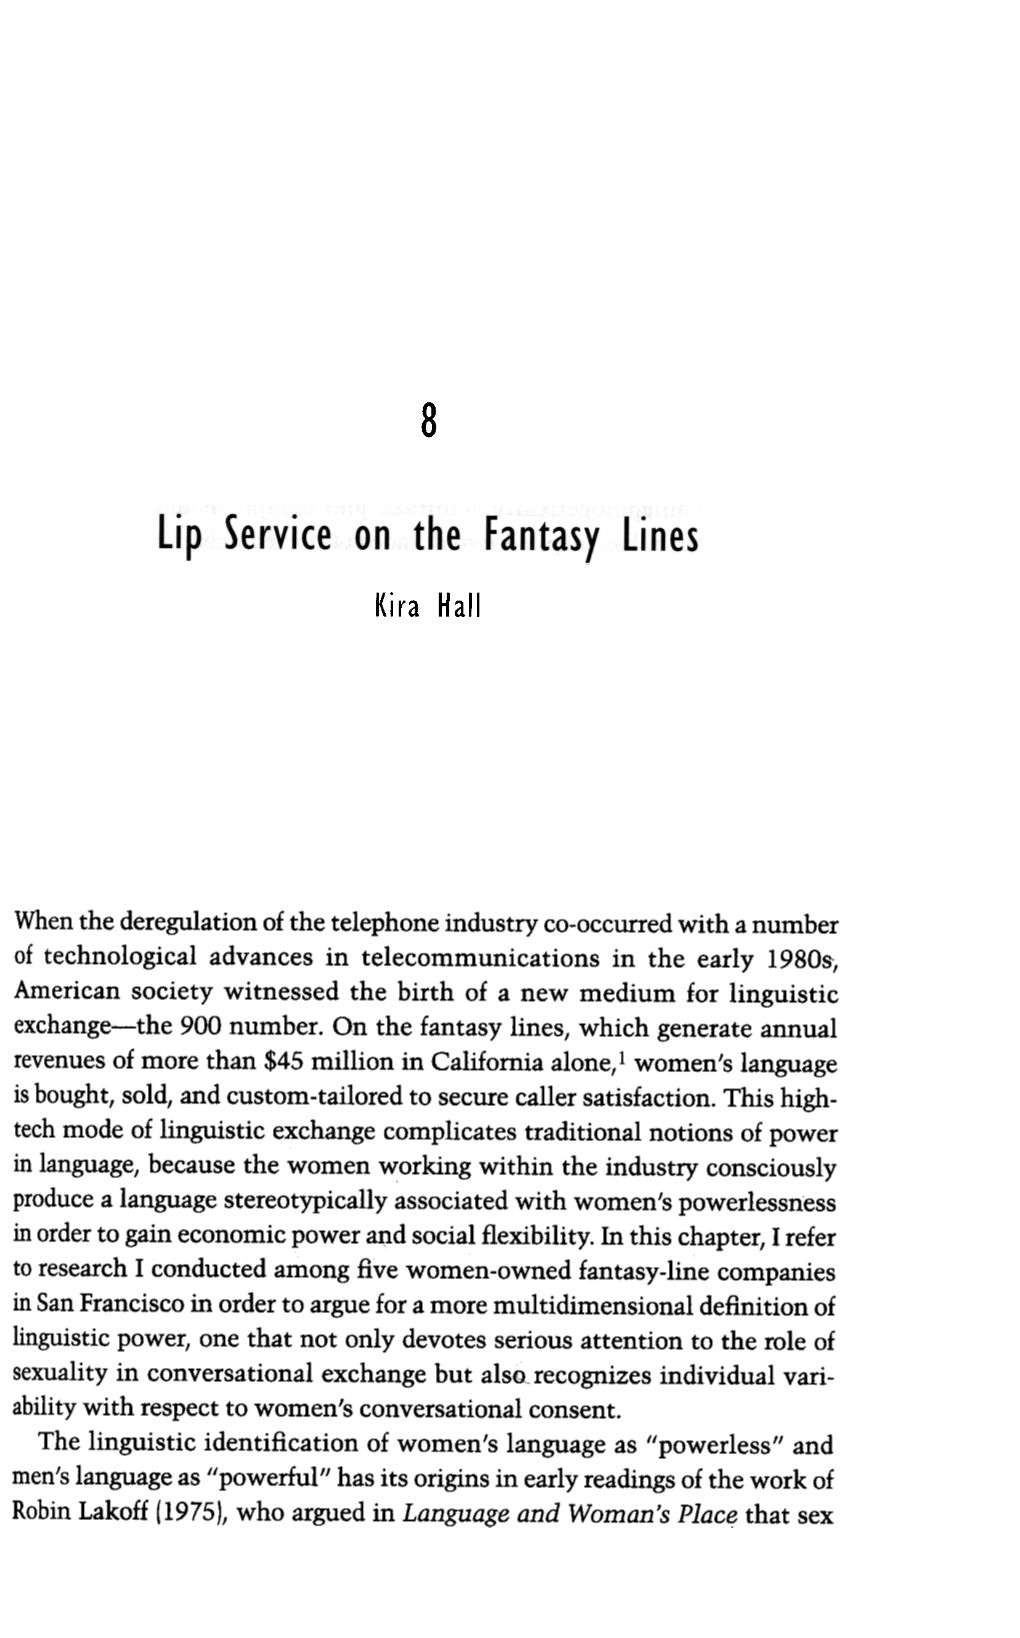 Lip Service on the Fantasy Lines